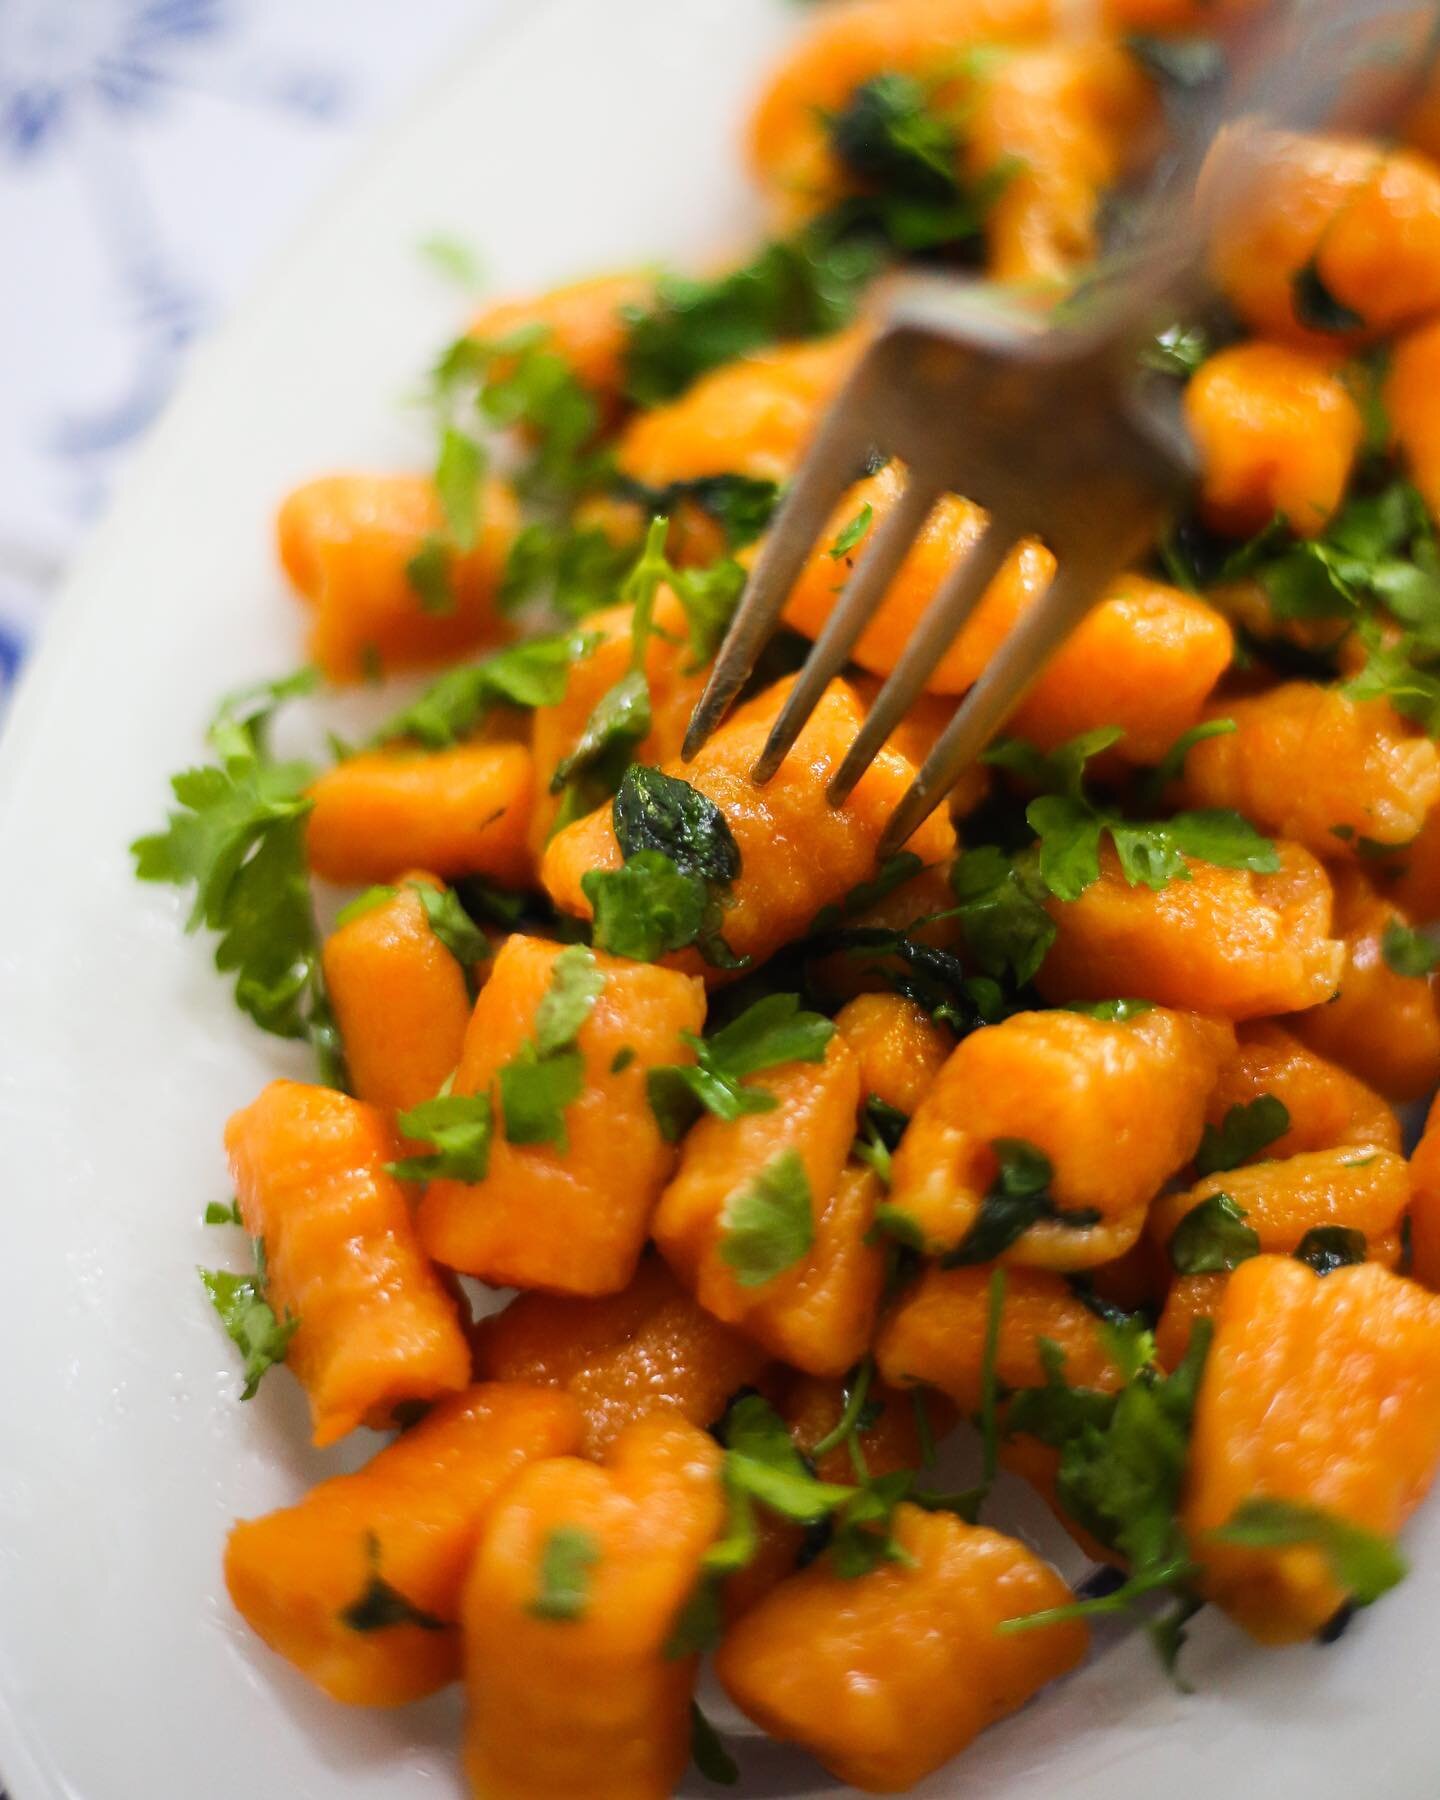 Sweet Potato and Parsley Gnocchi 🍠🌱

These lil carrot looking bombs are, in fact, sweet potato gnocchi - easy to make, although not rapid (took me just over 45 minutes), but utterly butterly delicious. Welcome to Gnocchi 101:

Step 1 - Nail the pro